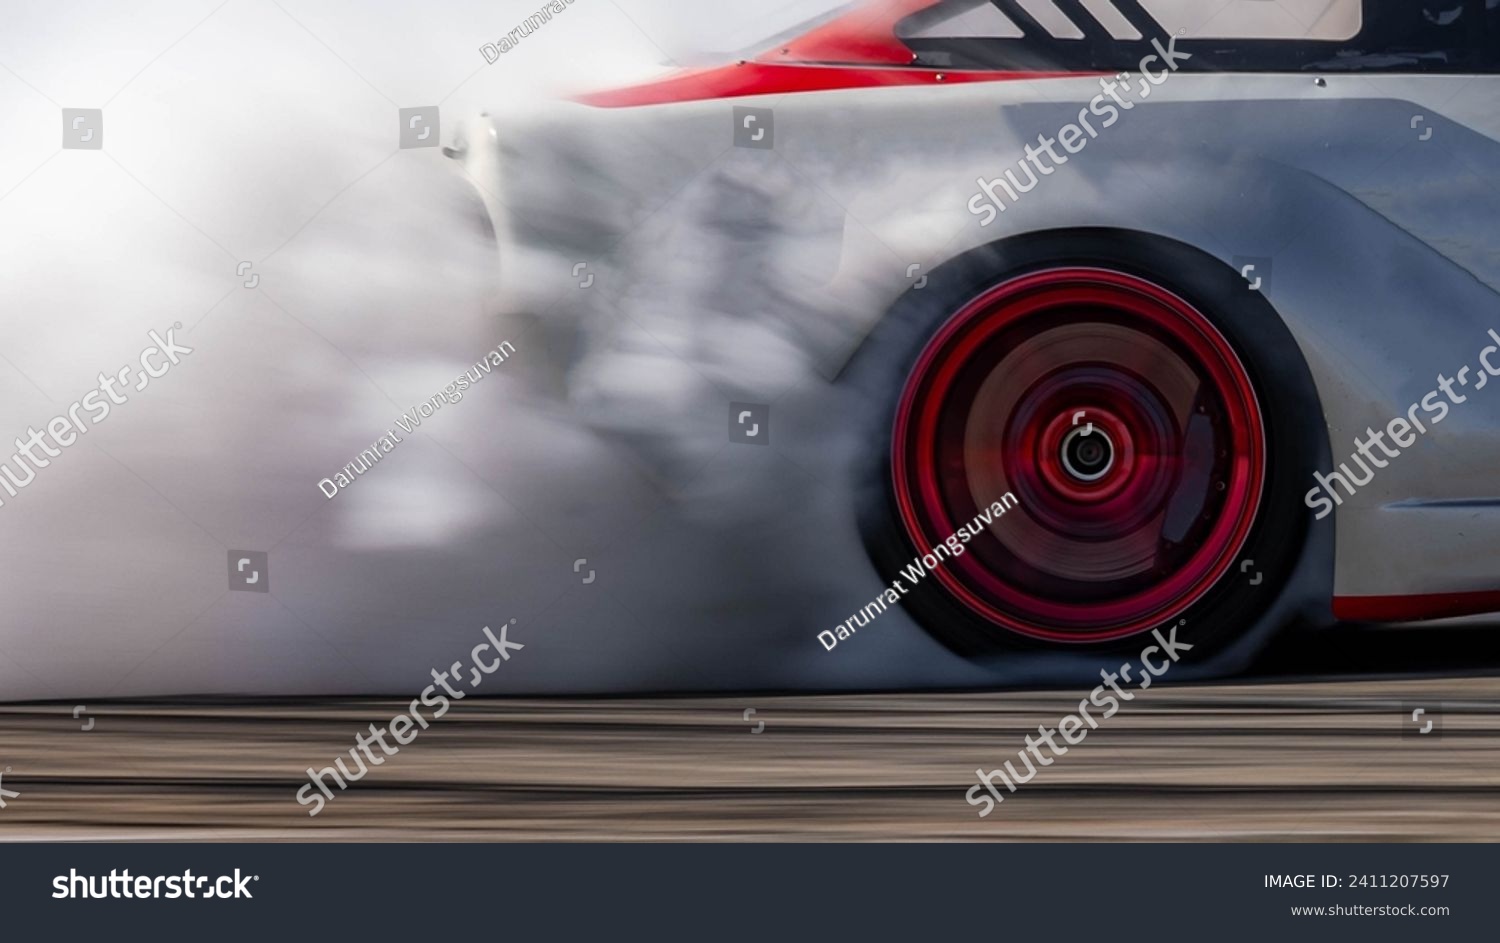 Blurred car drifting diffusion race drift car with lots of smoke from burning tires on speed track, Professional driver drifting car on race track with smoke. #2411207597